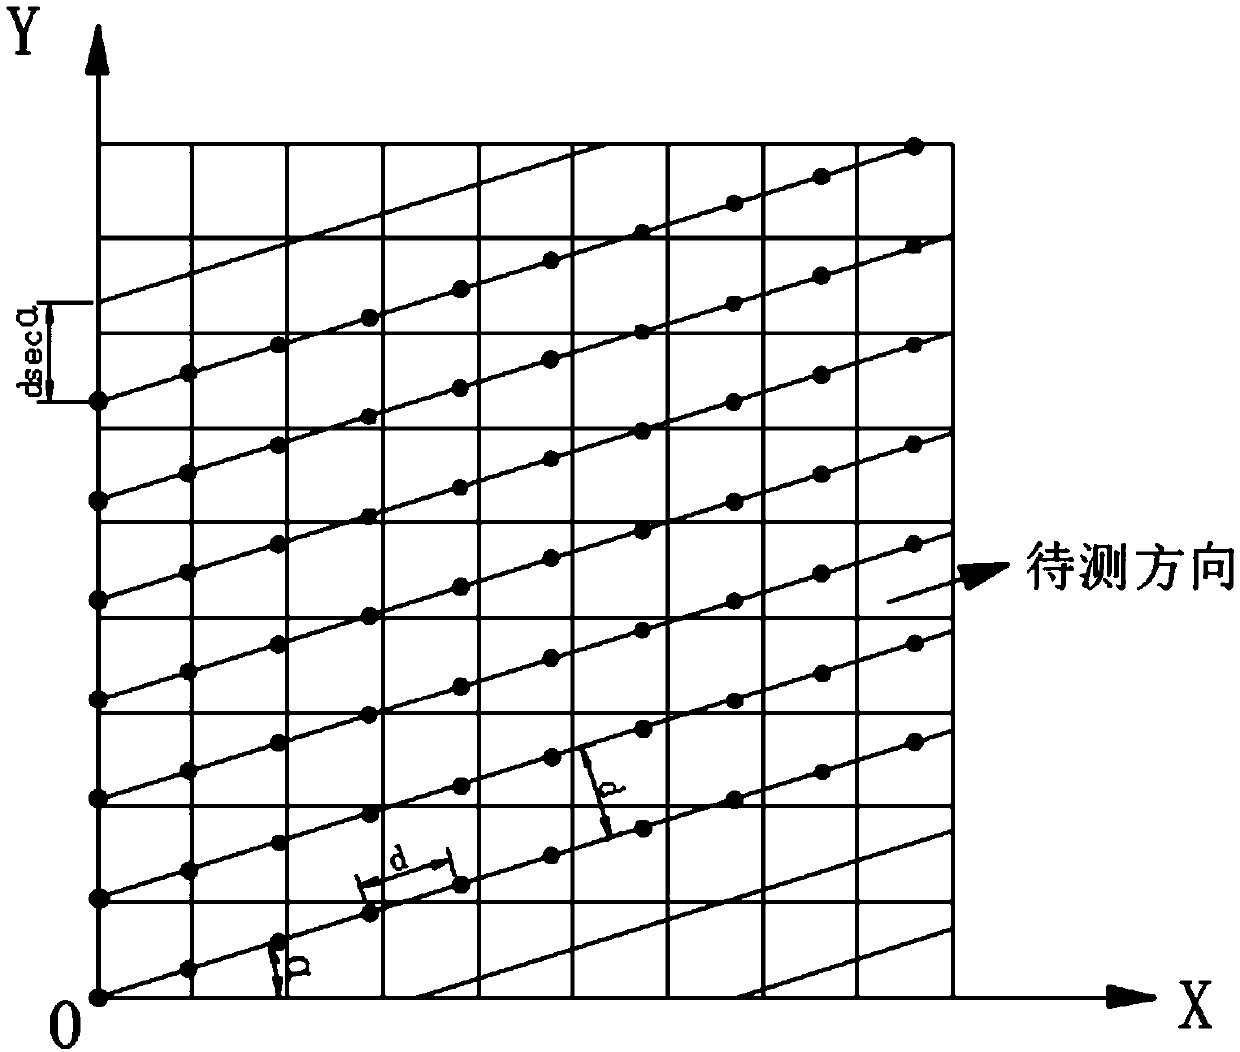 A joint surface roughness calculation method based on shape correction